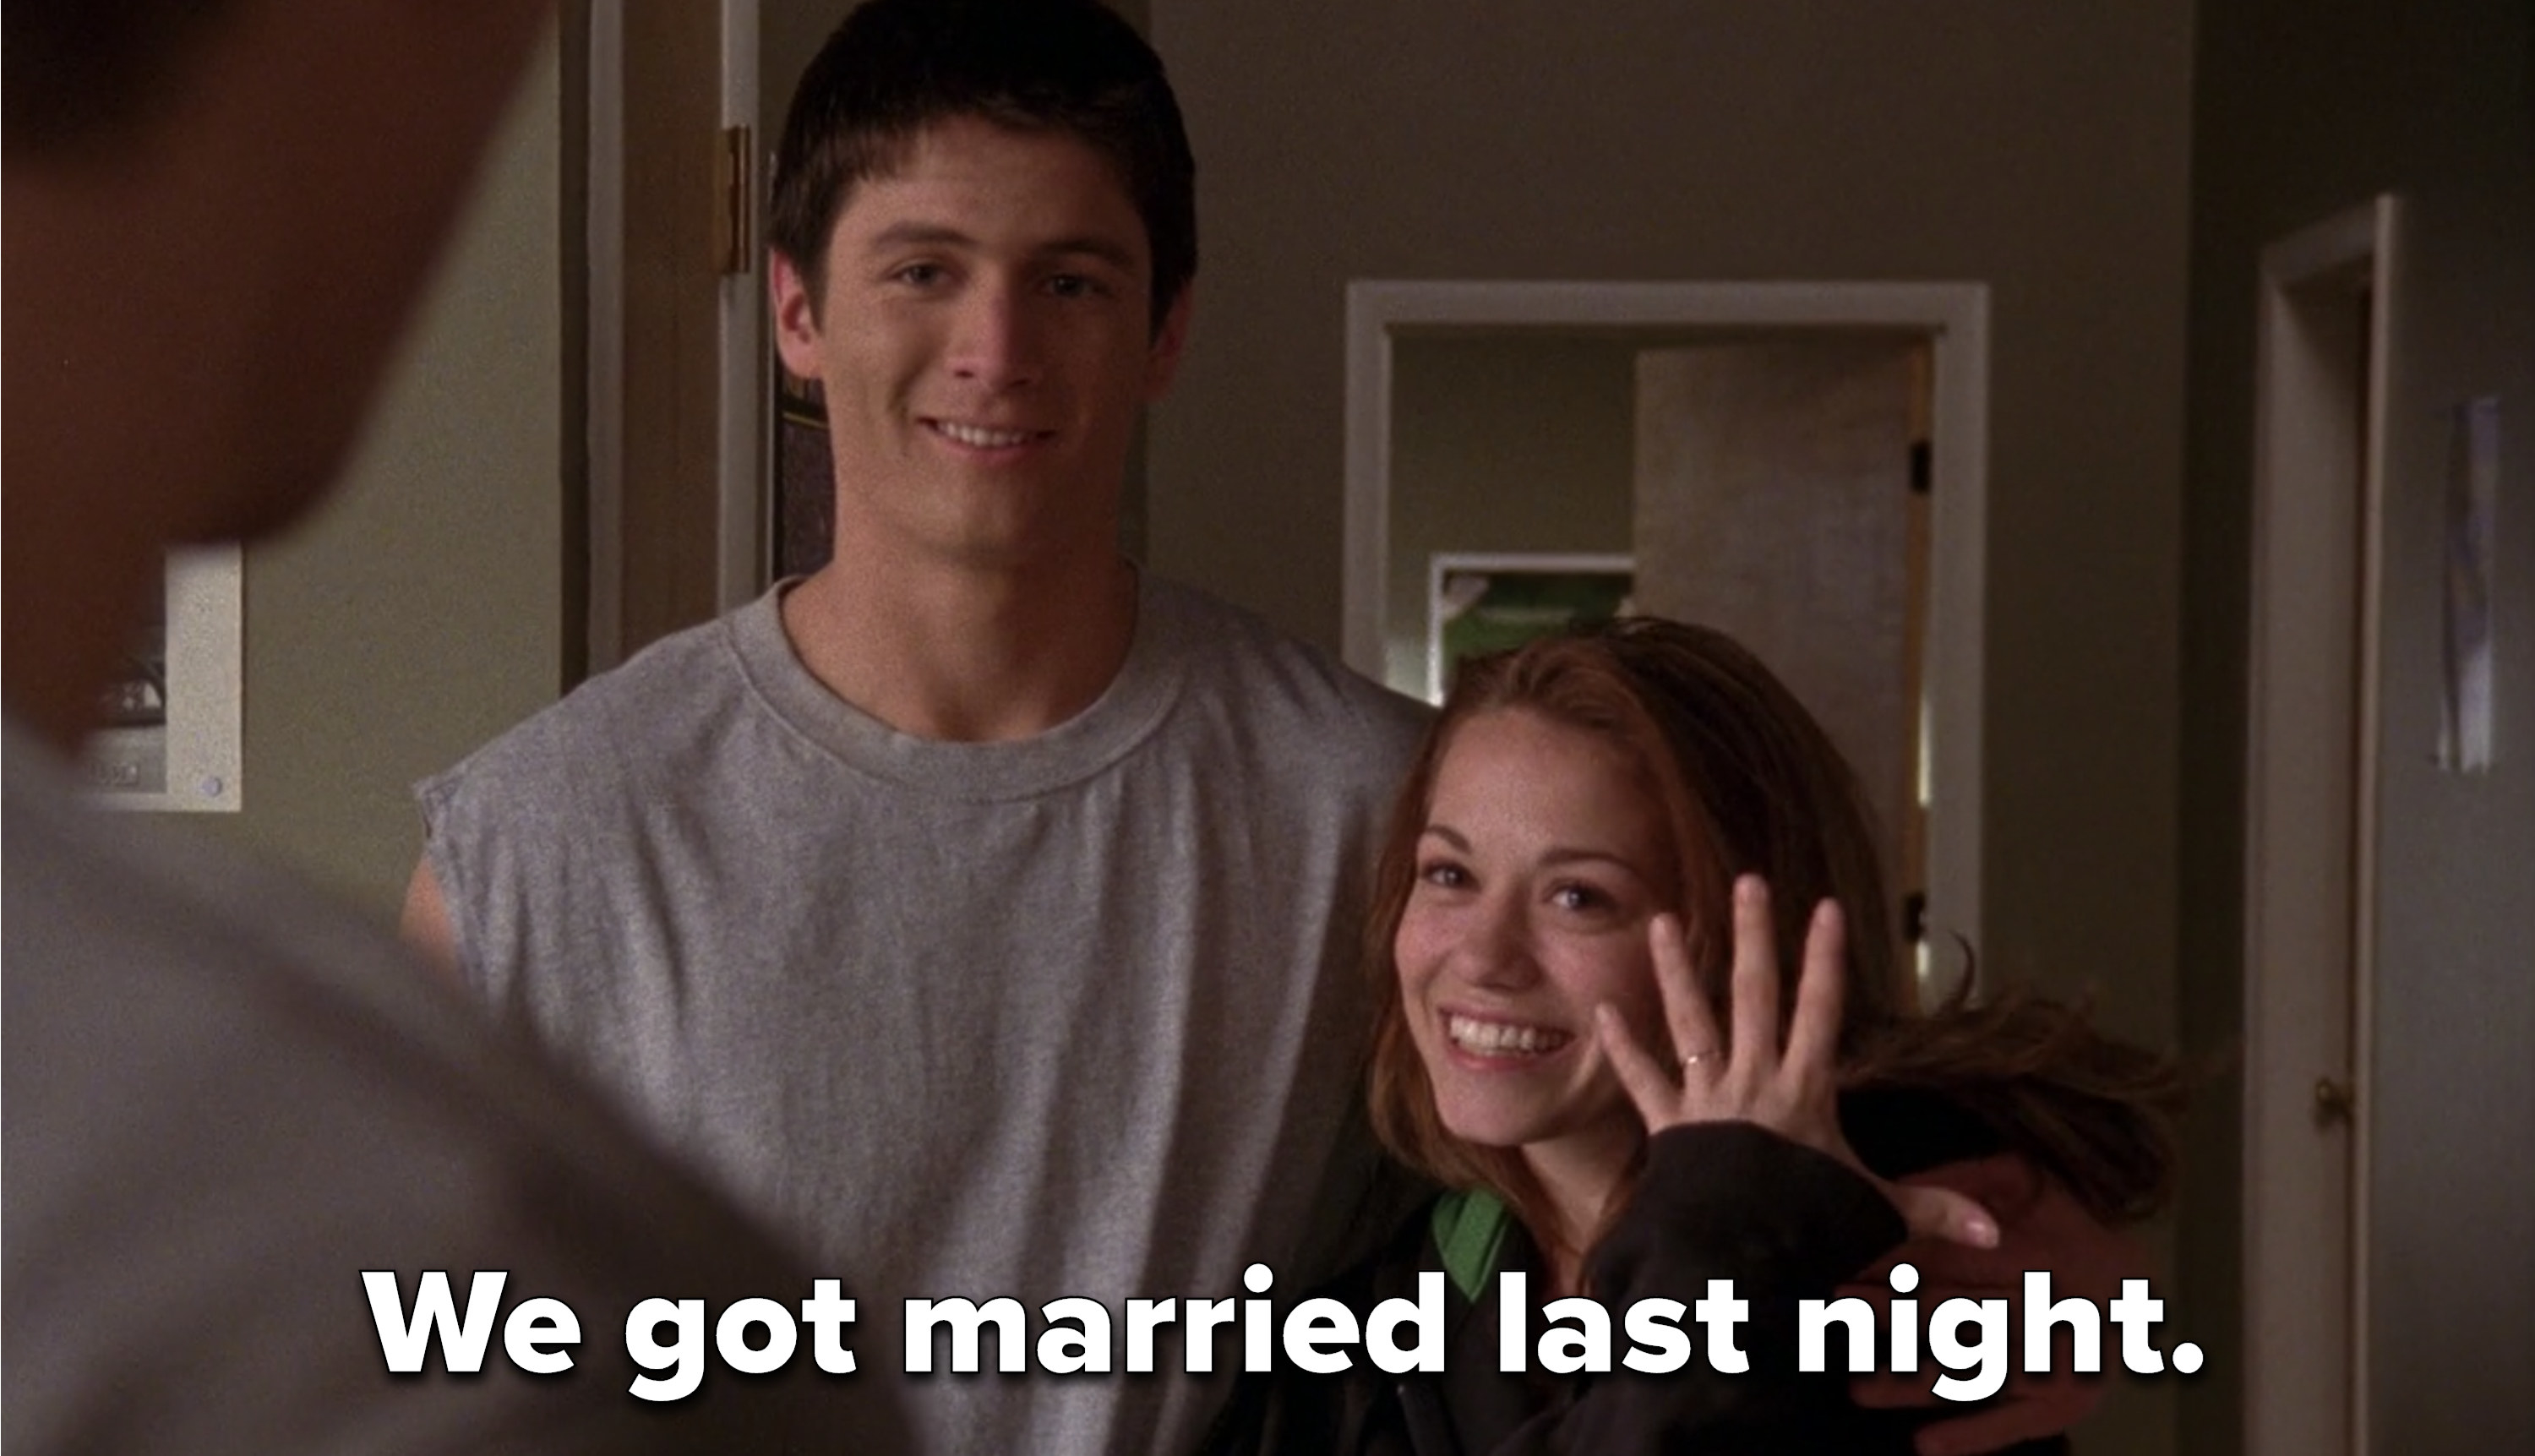 Haley flashing her ring to Lucas and saying her and Nathan got married the night prior